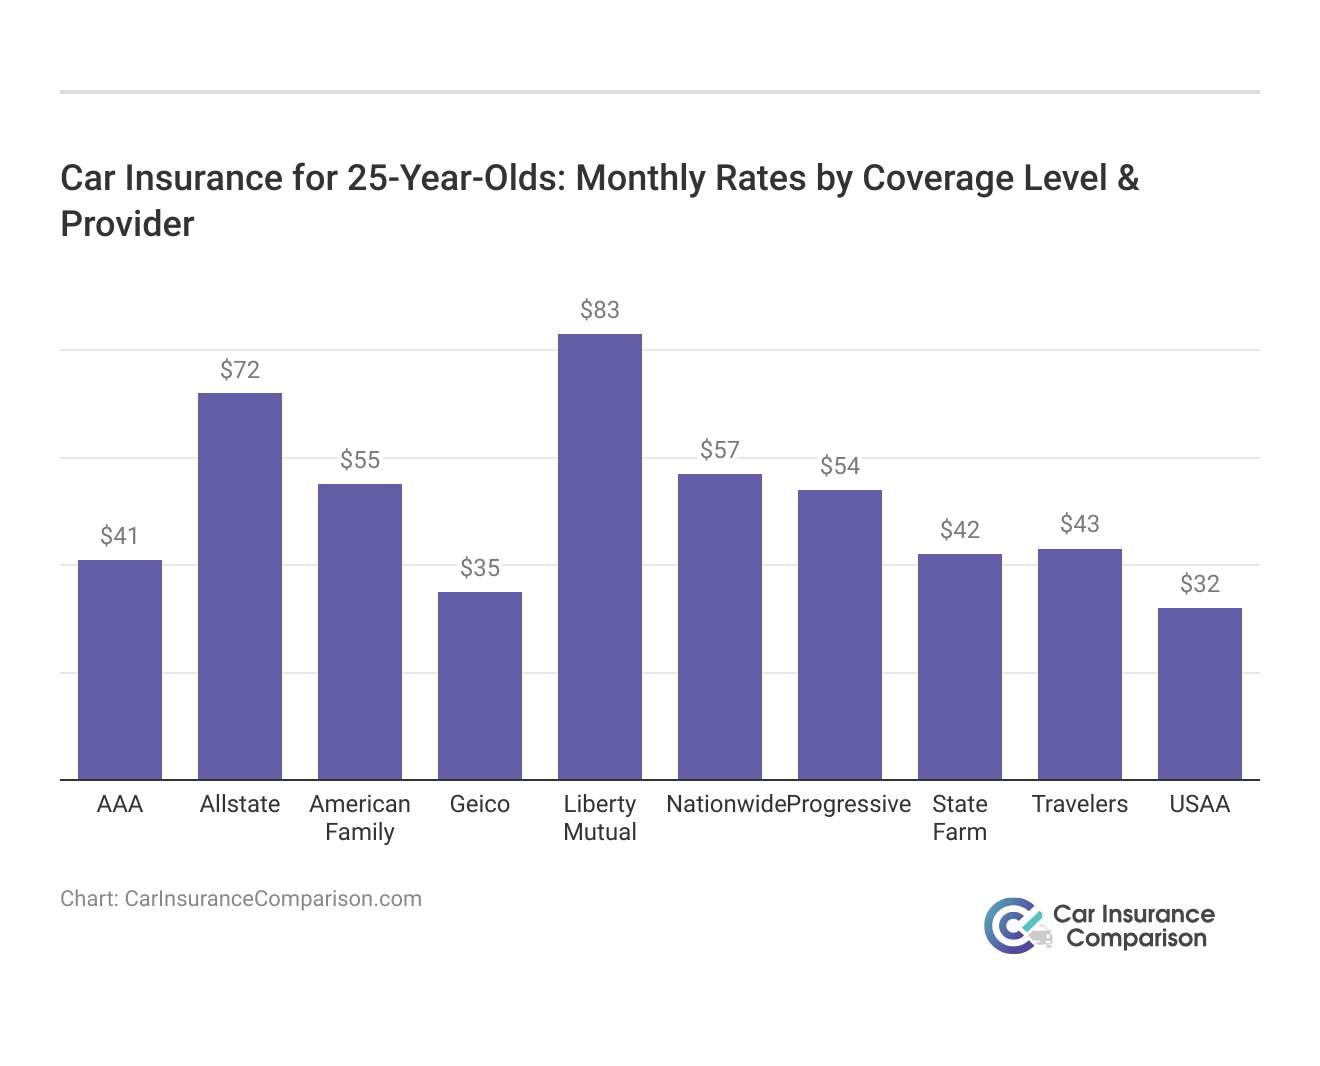 <h3>Car Insurance for 25-Year-Olds: Monthly Rates by Coverage Level & Provider</h3>